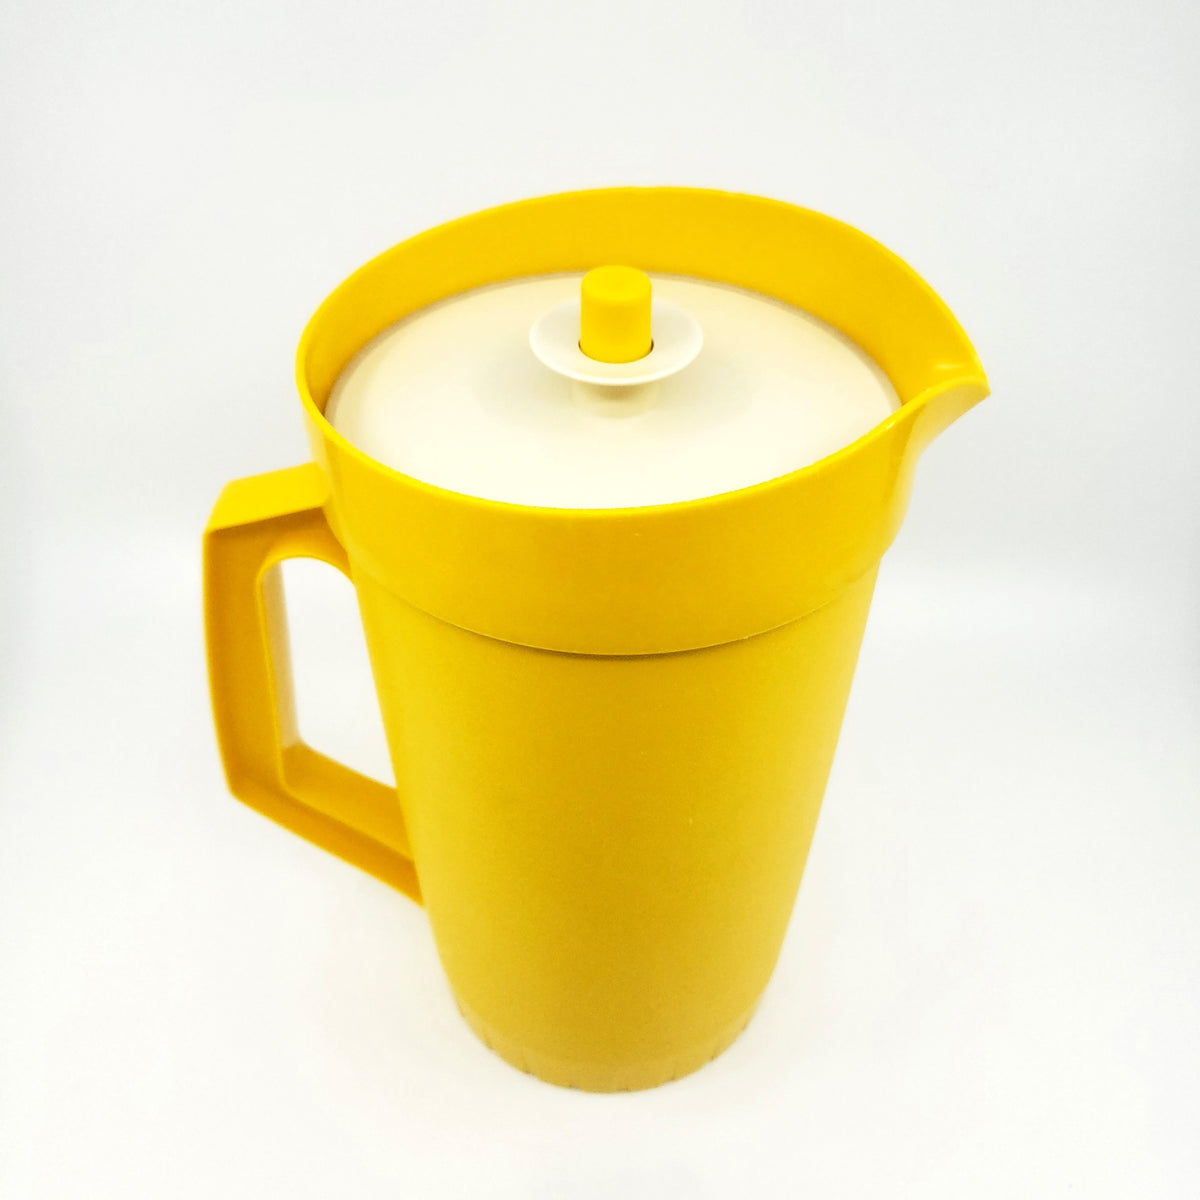 Vintage Tupperware 2 Qt Beverage Container or Pitcher, Handle